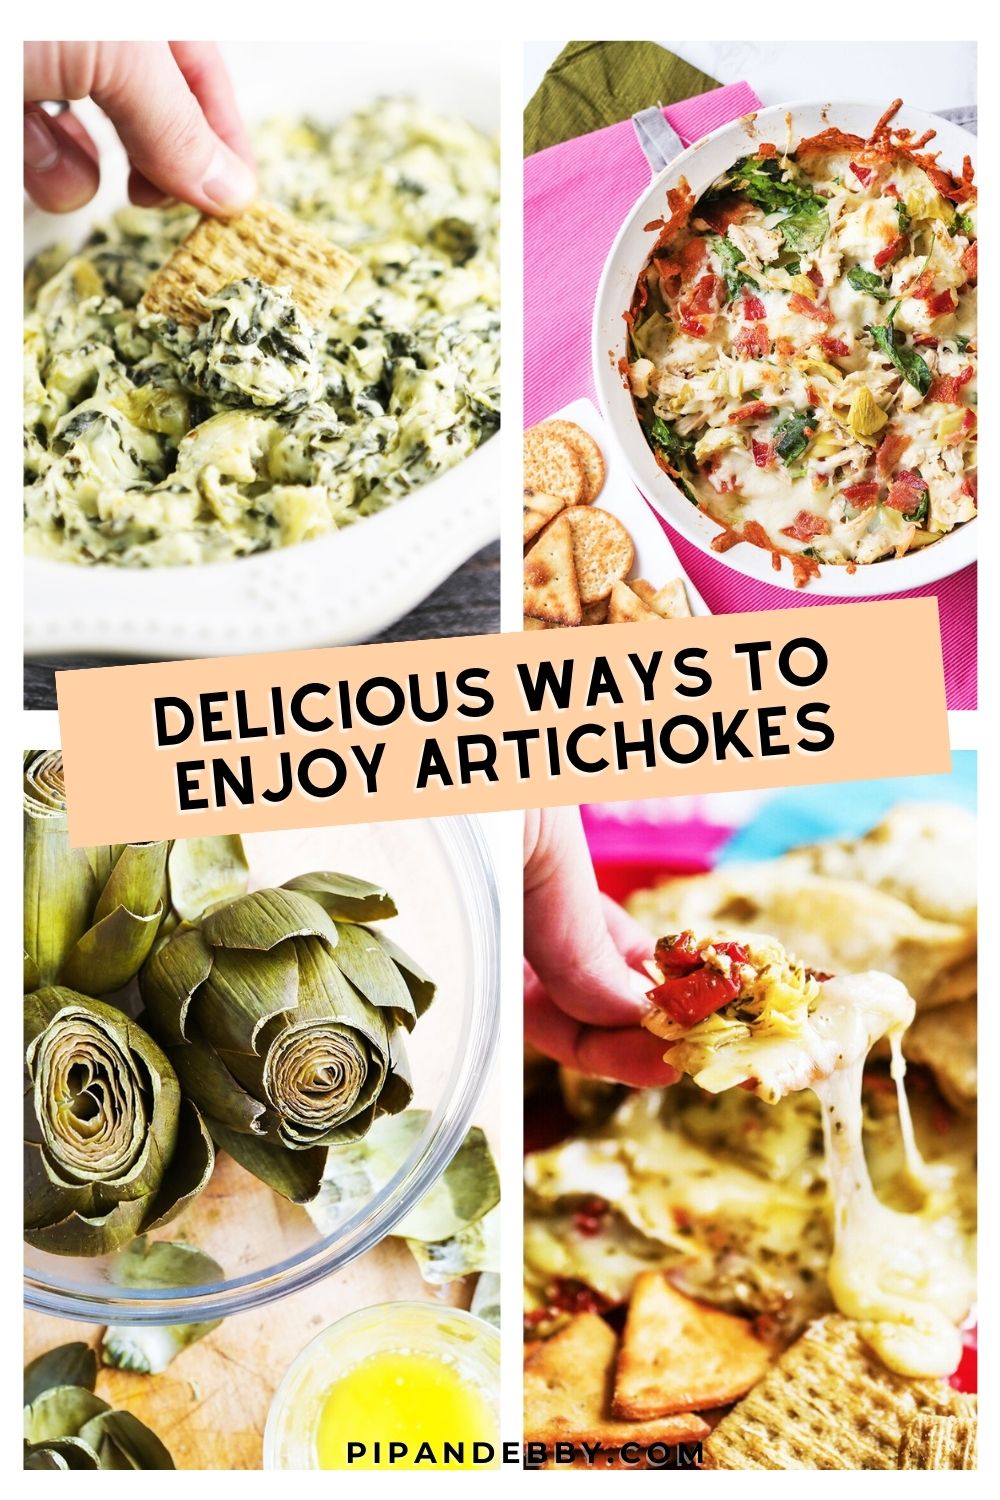 Pinterest image of 4 artichoke recipes with text overlay of delicious ways to enjoy artichokes. 